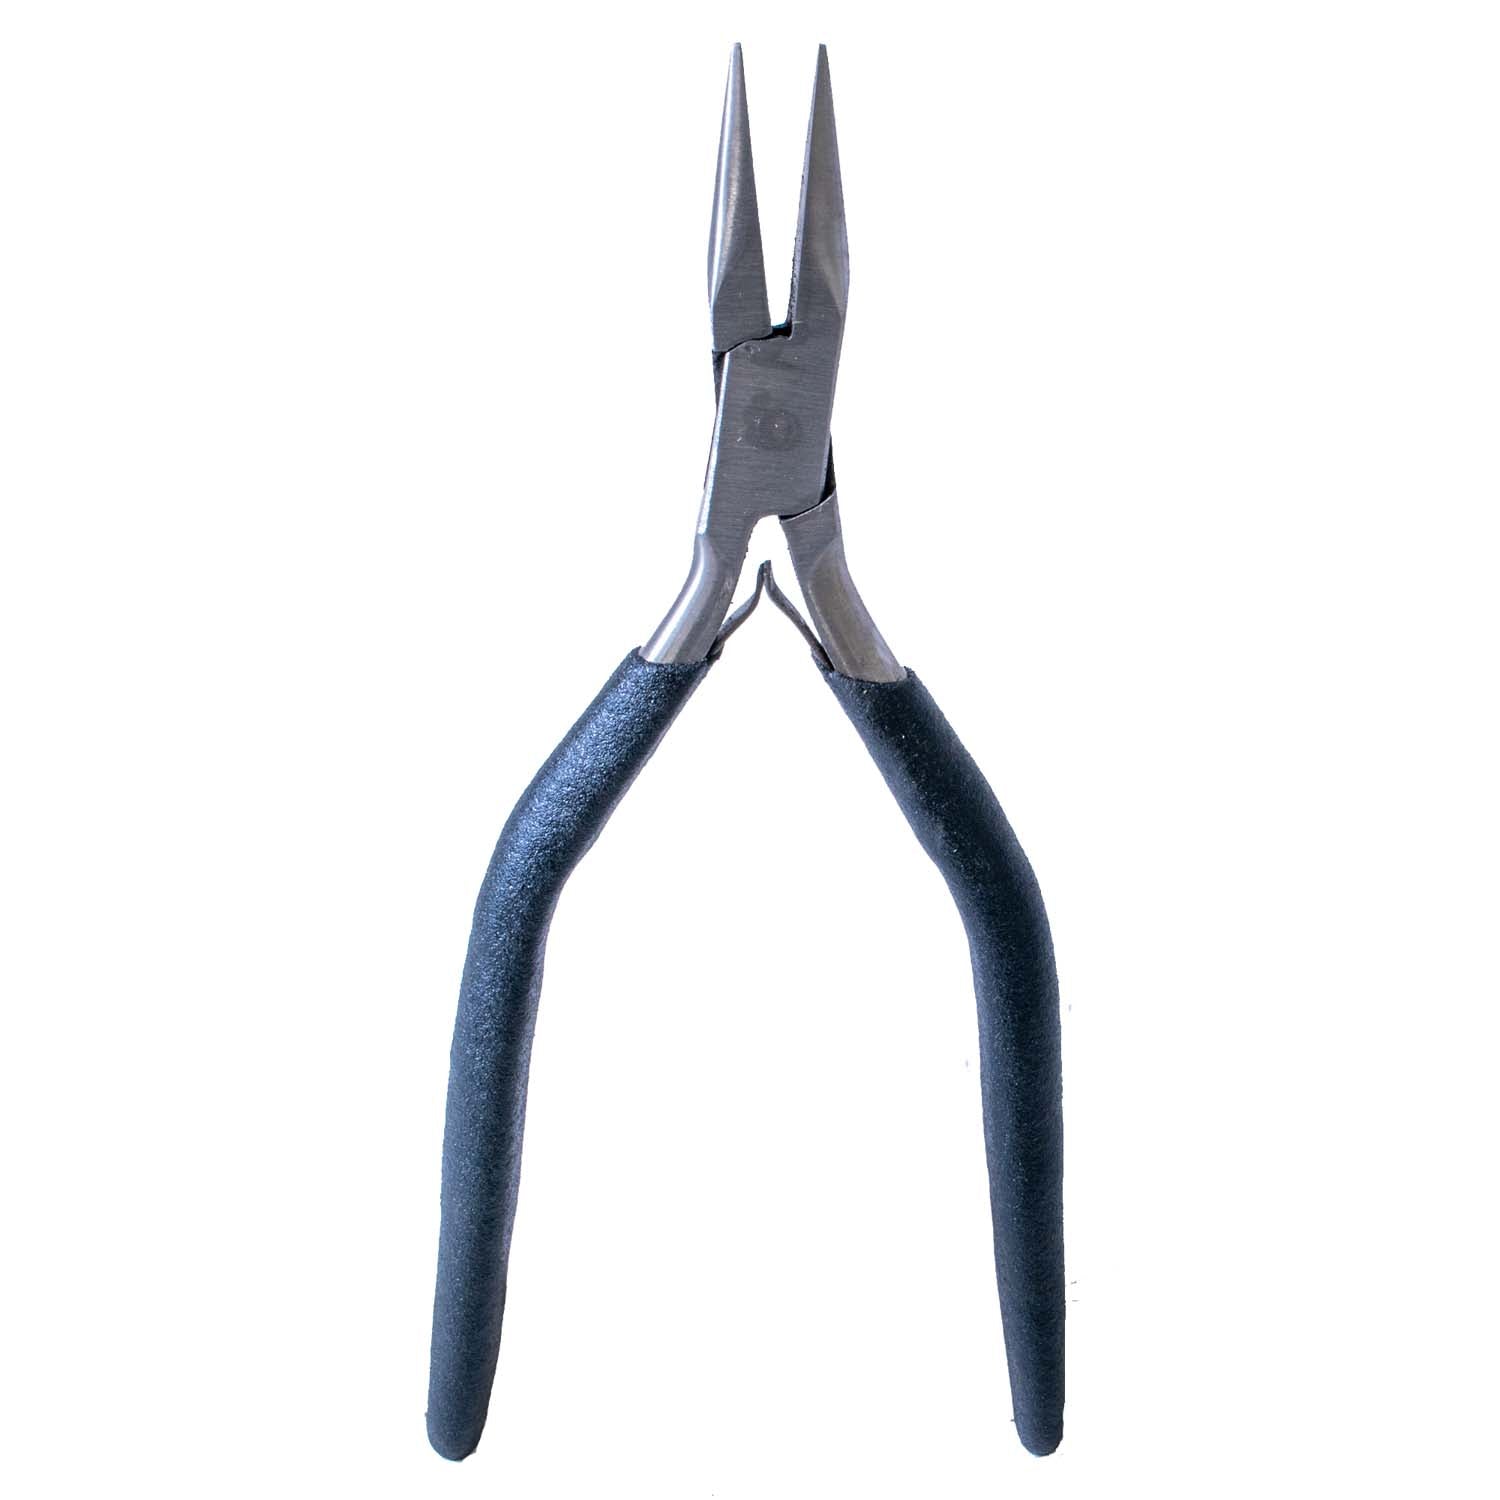 Chain-nose pliers. 6.5 inches